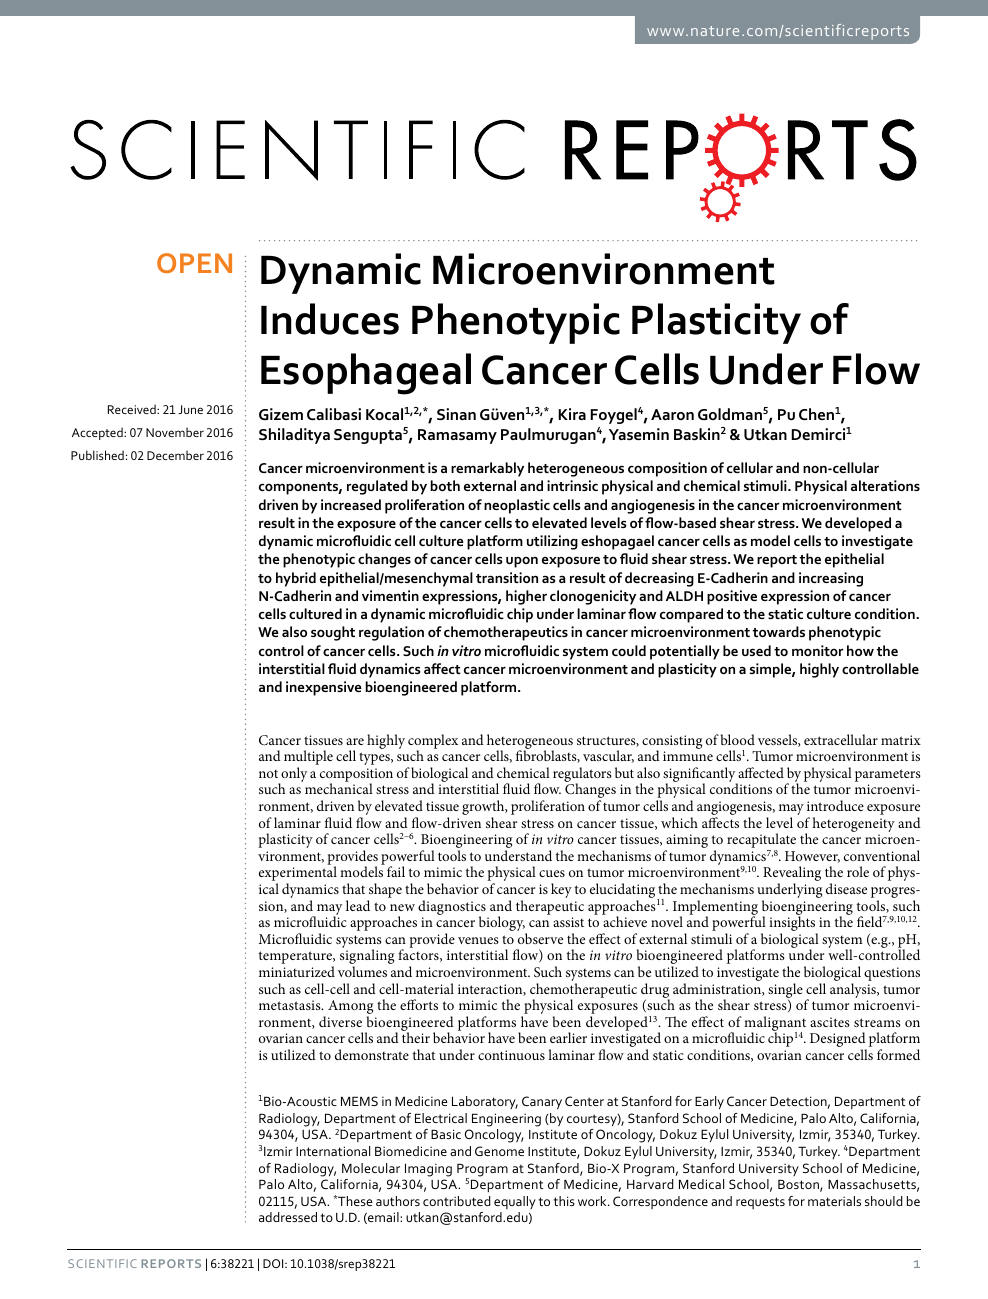 Dynamic Microenvironment Induces Phenotypic Plasticity Of